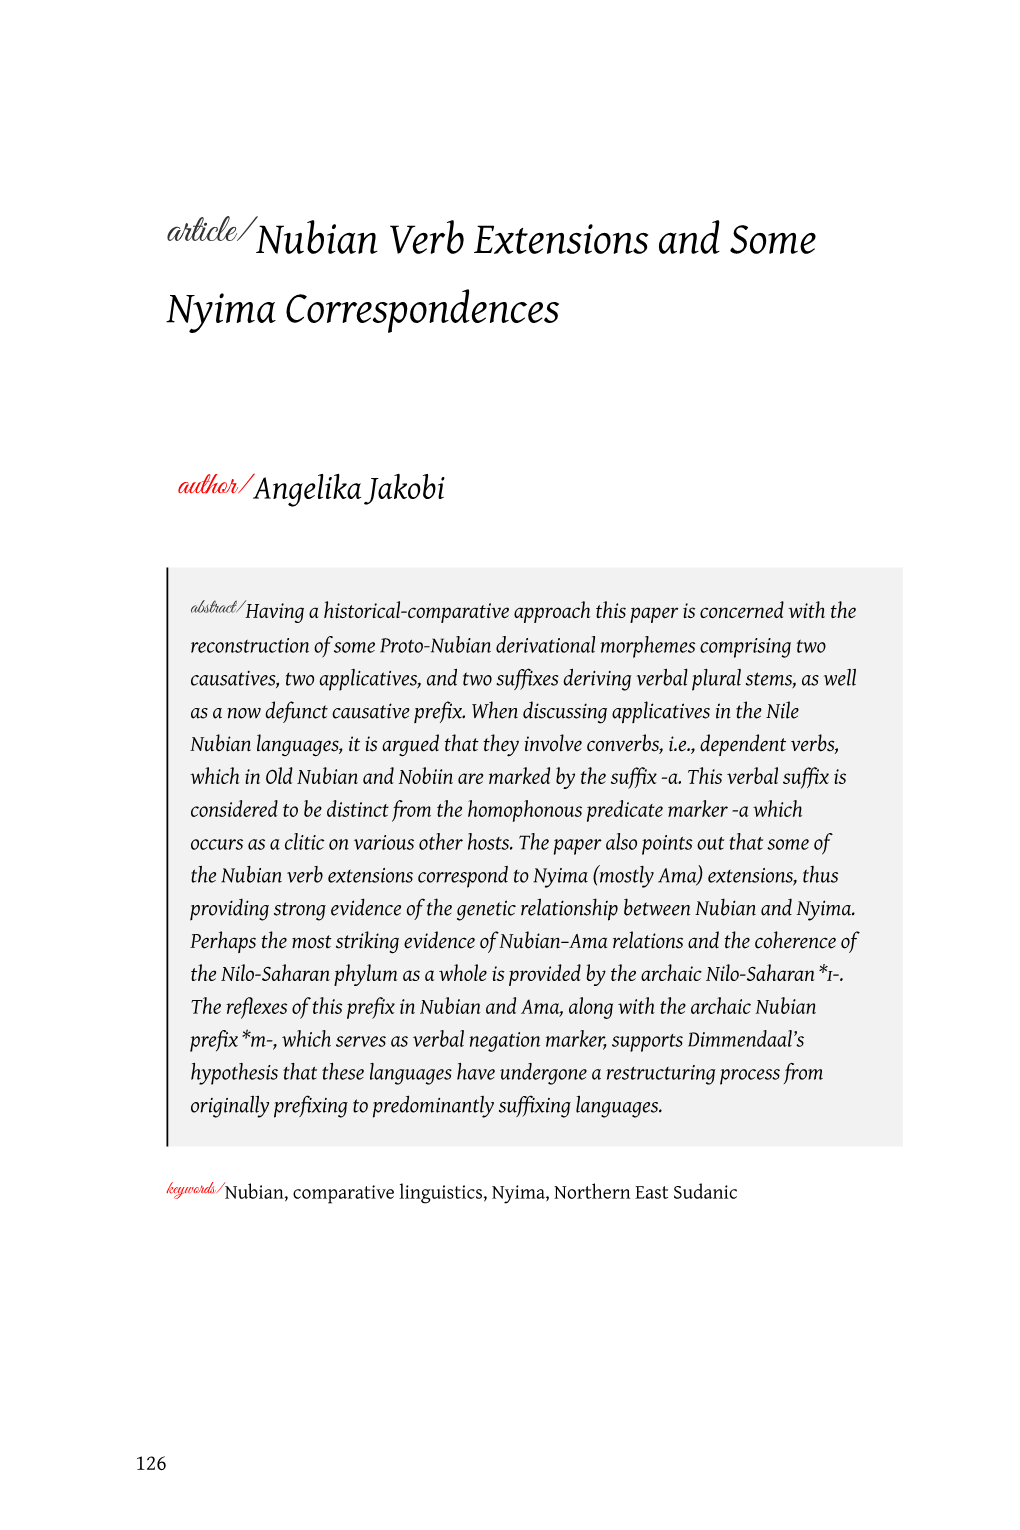 Nubian Verb Extensions and Some Nyima Correspondences